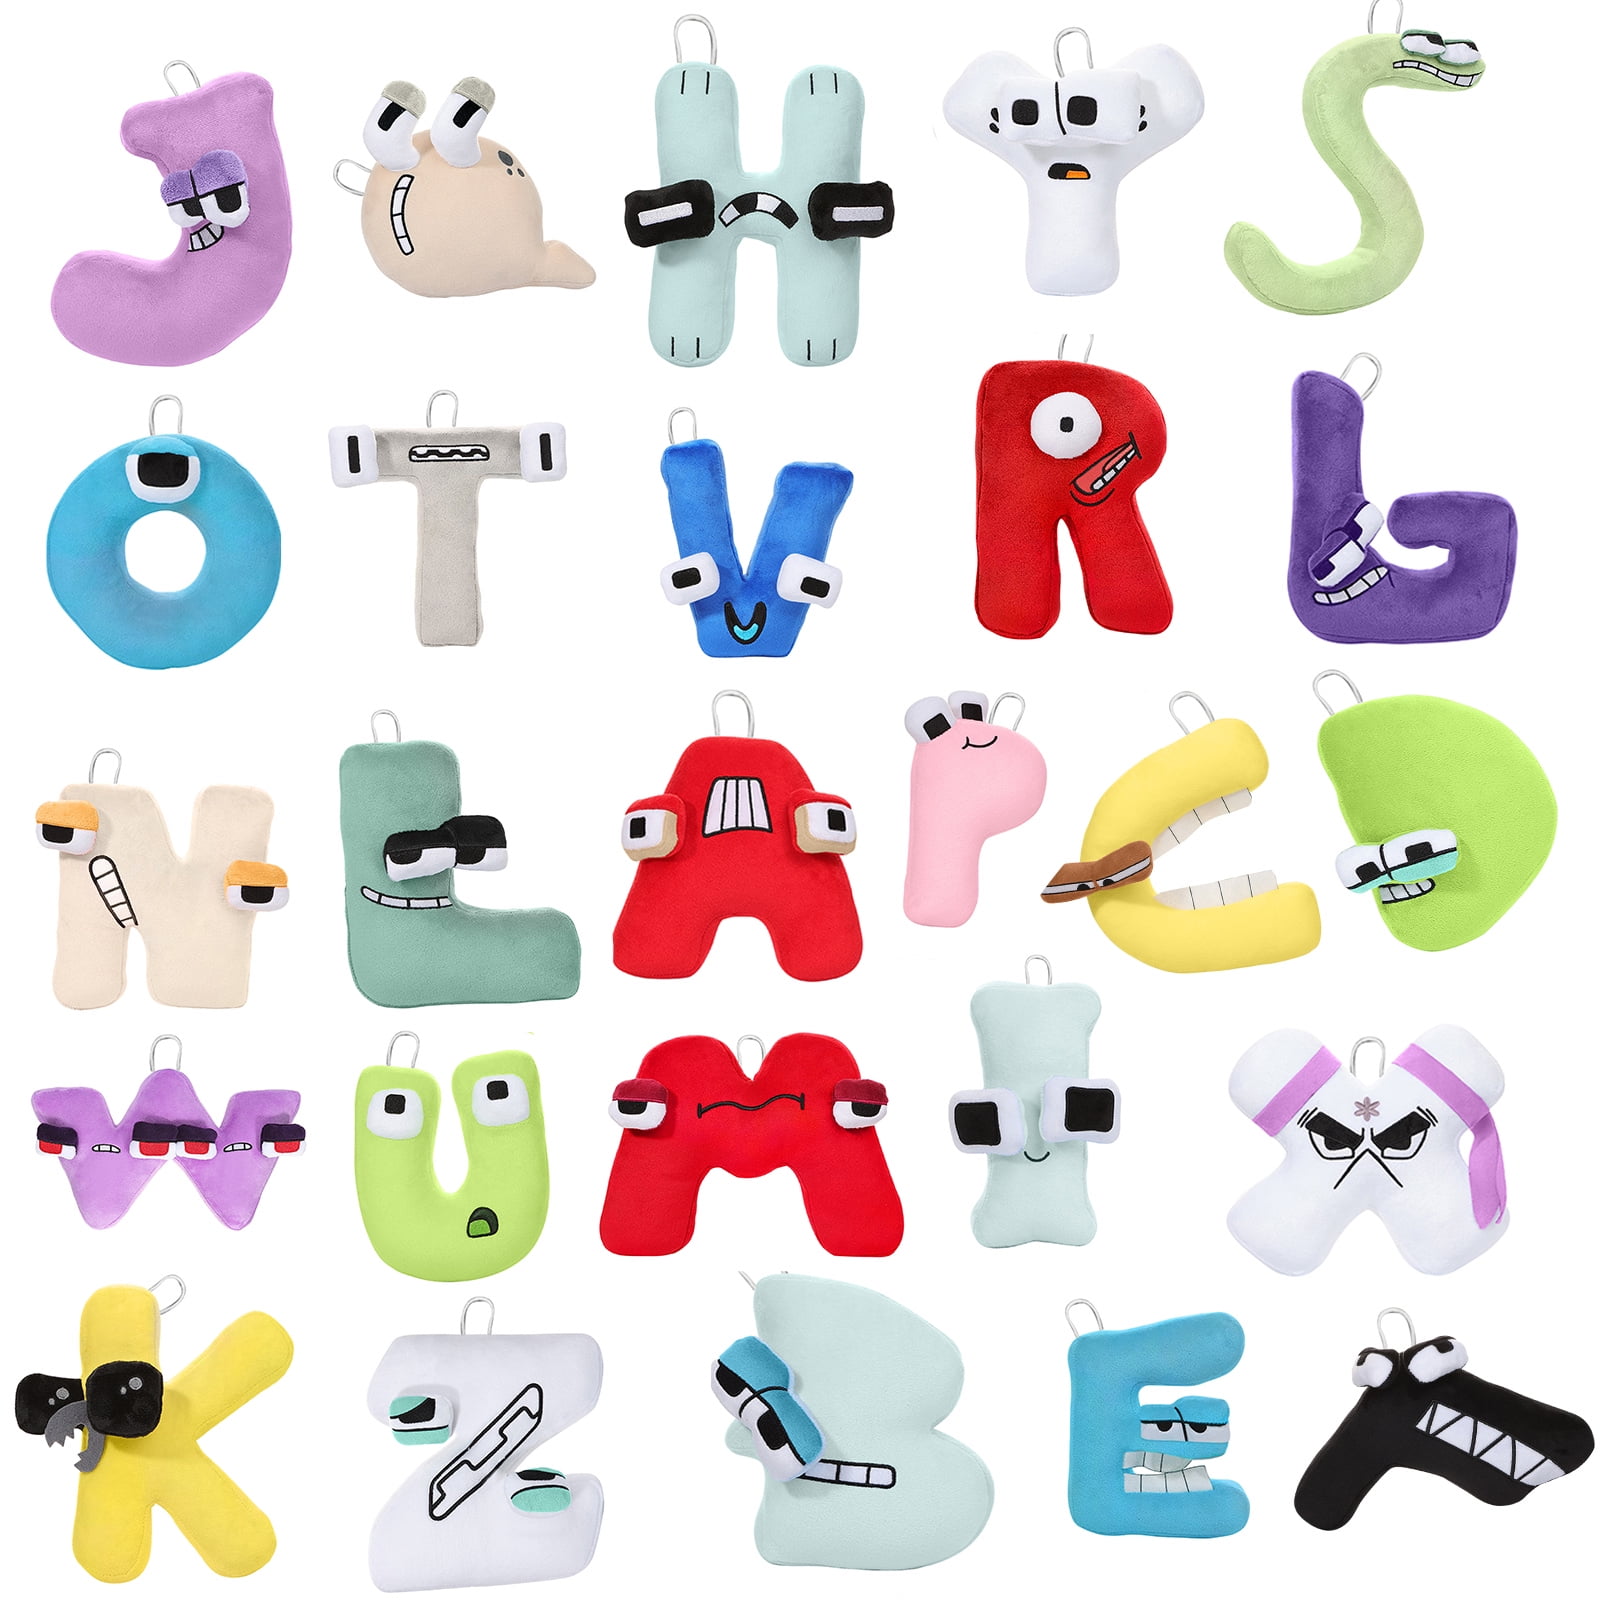 26 Letter Alphabet Plush Toys, Lore Plushies, Soft and Cuddly,Preschool  Stuffed Animals and Toys, Holiday and Birthday Gifts for Kids (Alphabet E)  